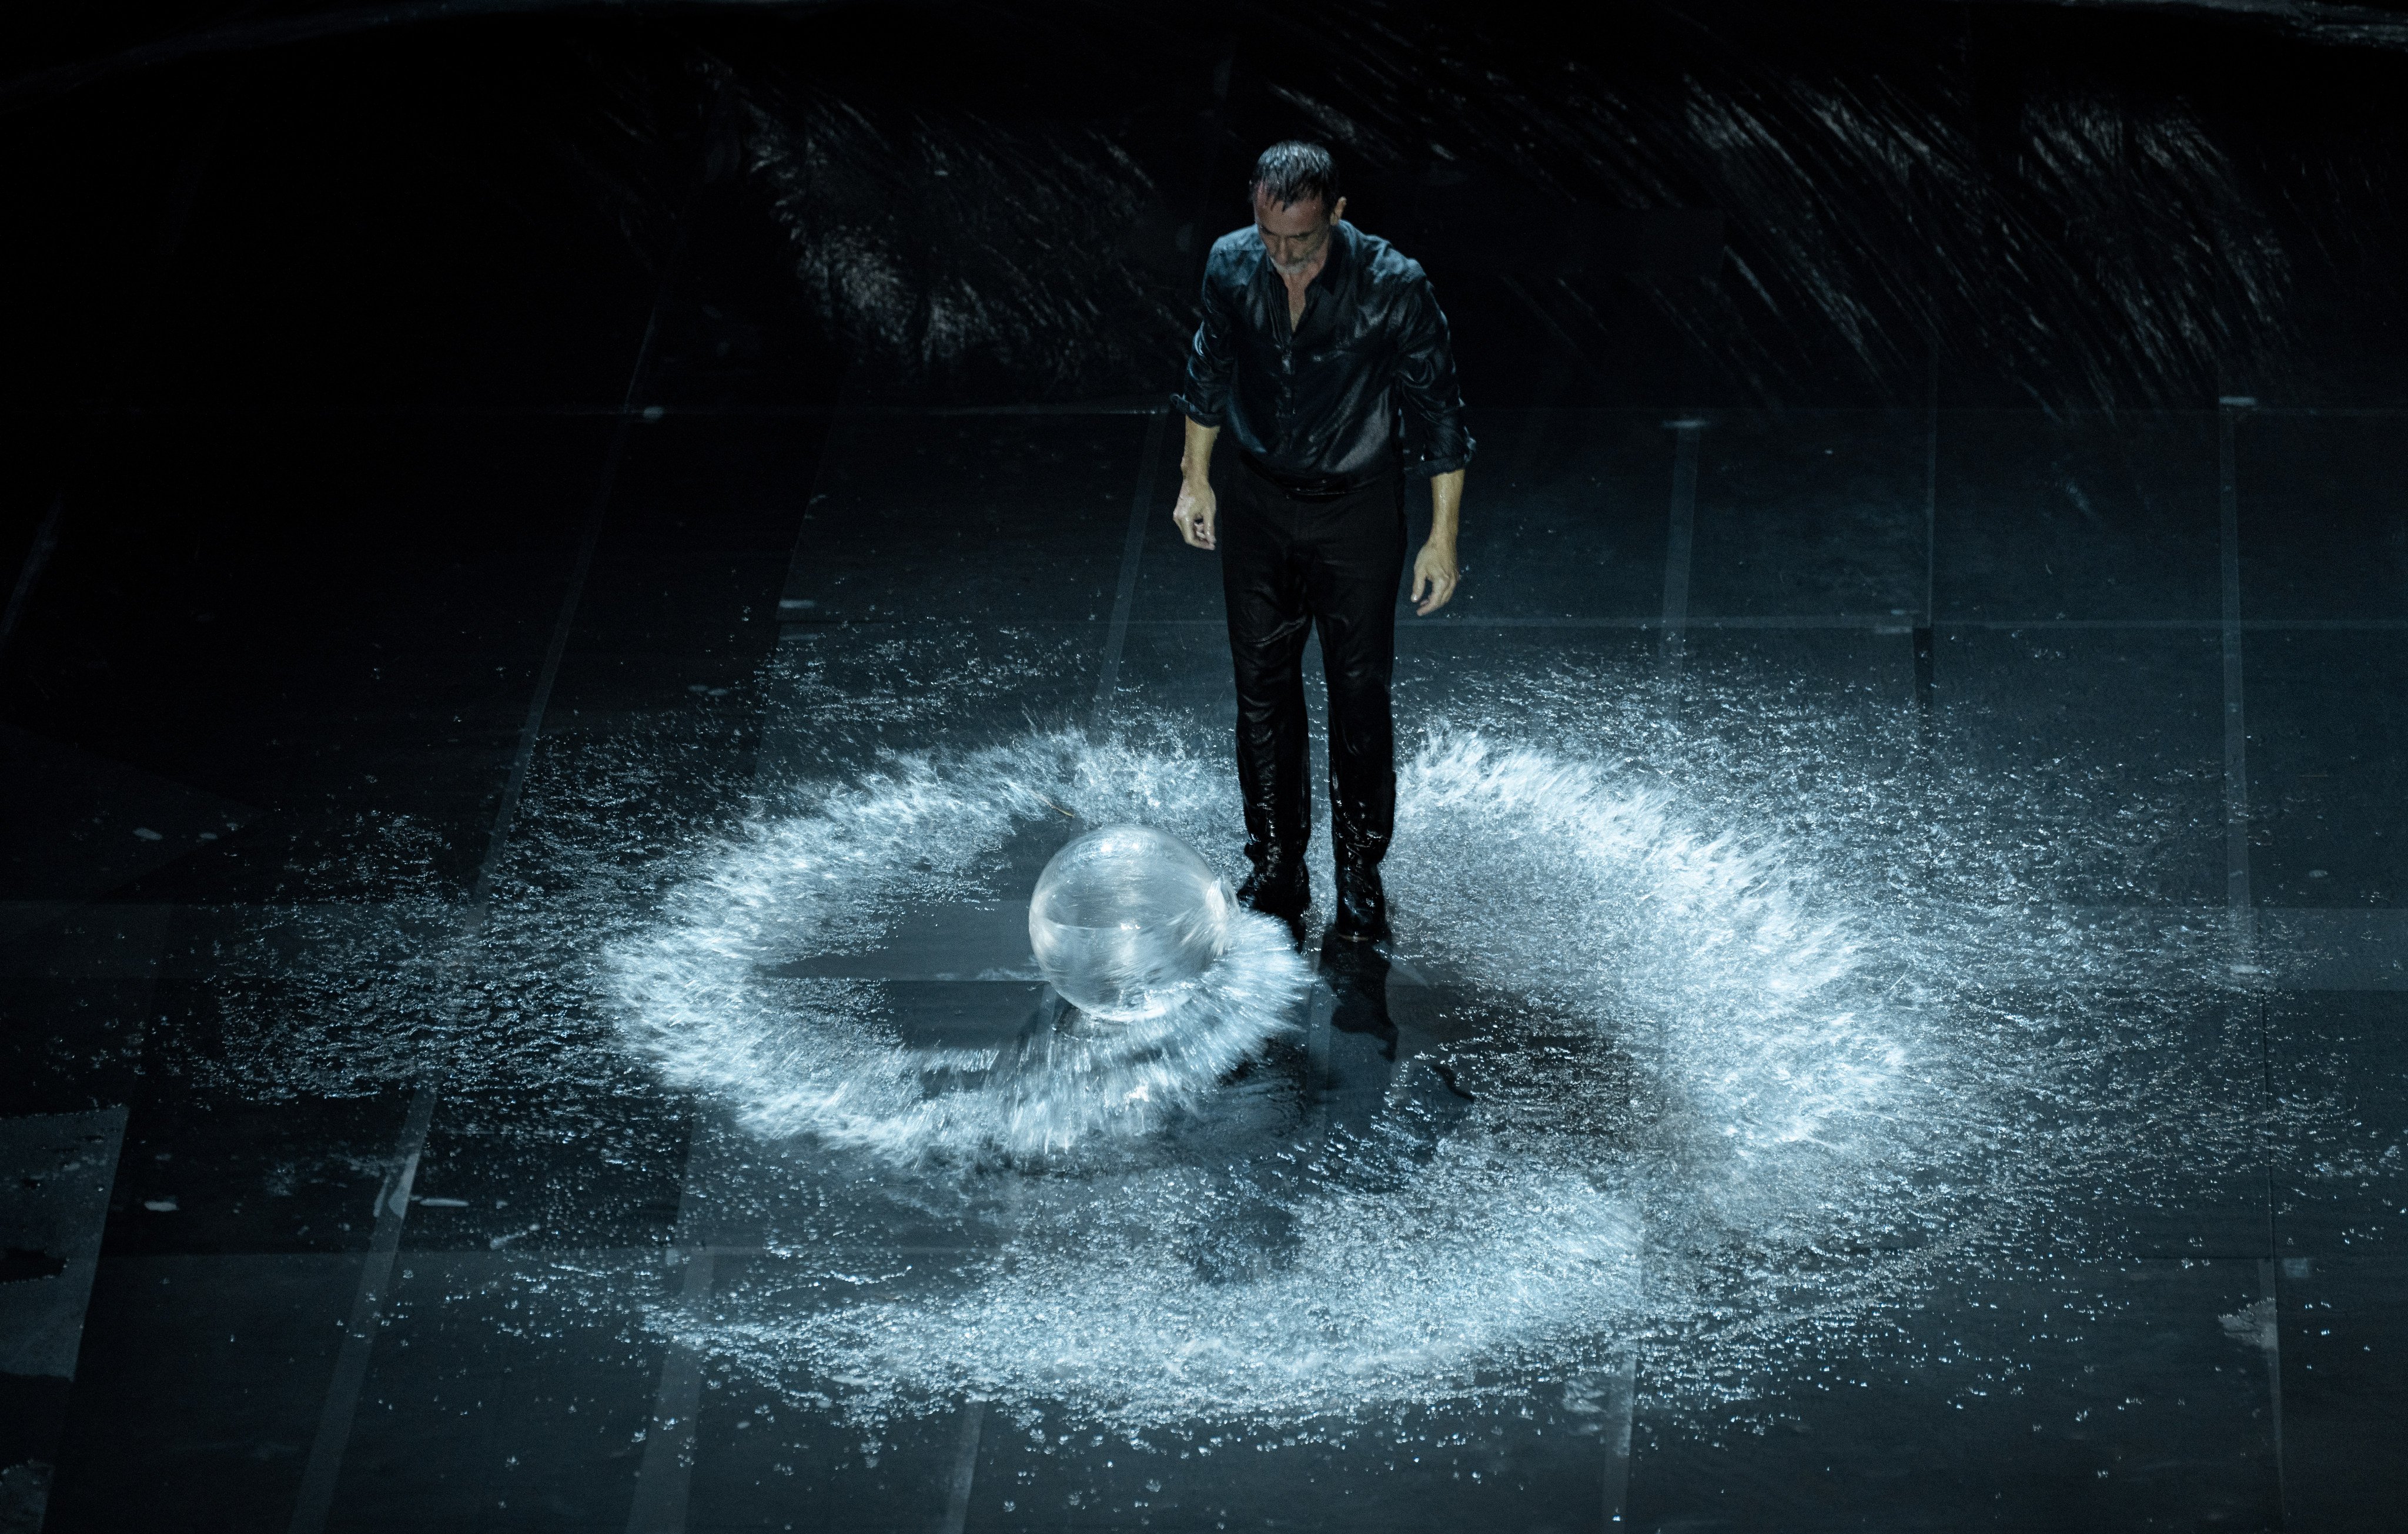 Acclaimed Greek choreographer Dimitris Papaioannou performs in his water-soaked dance show Ink, which will be presented at Hong Kong’s New Vision Arts Festival. Photo: Julian Mommert